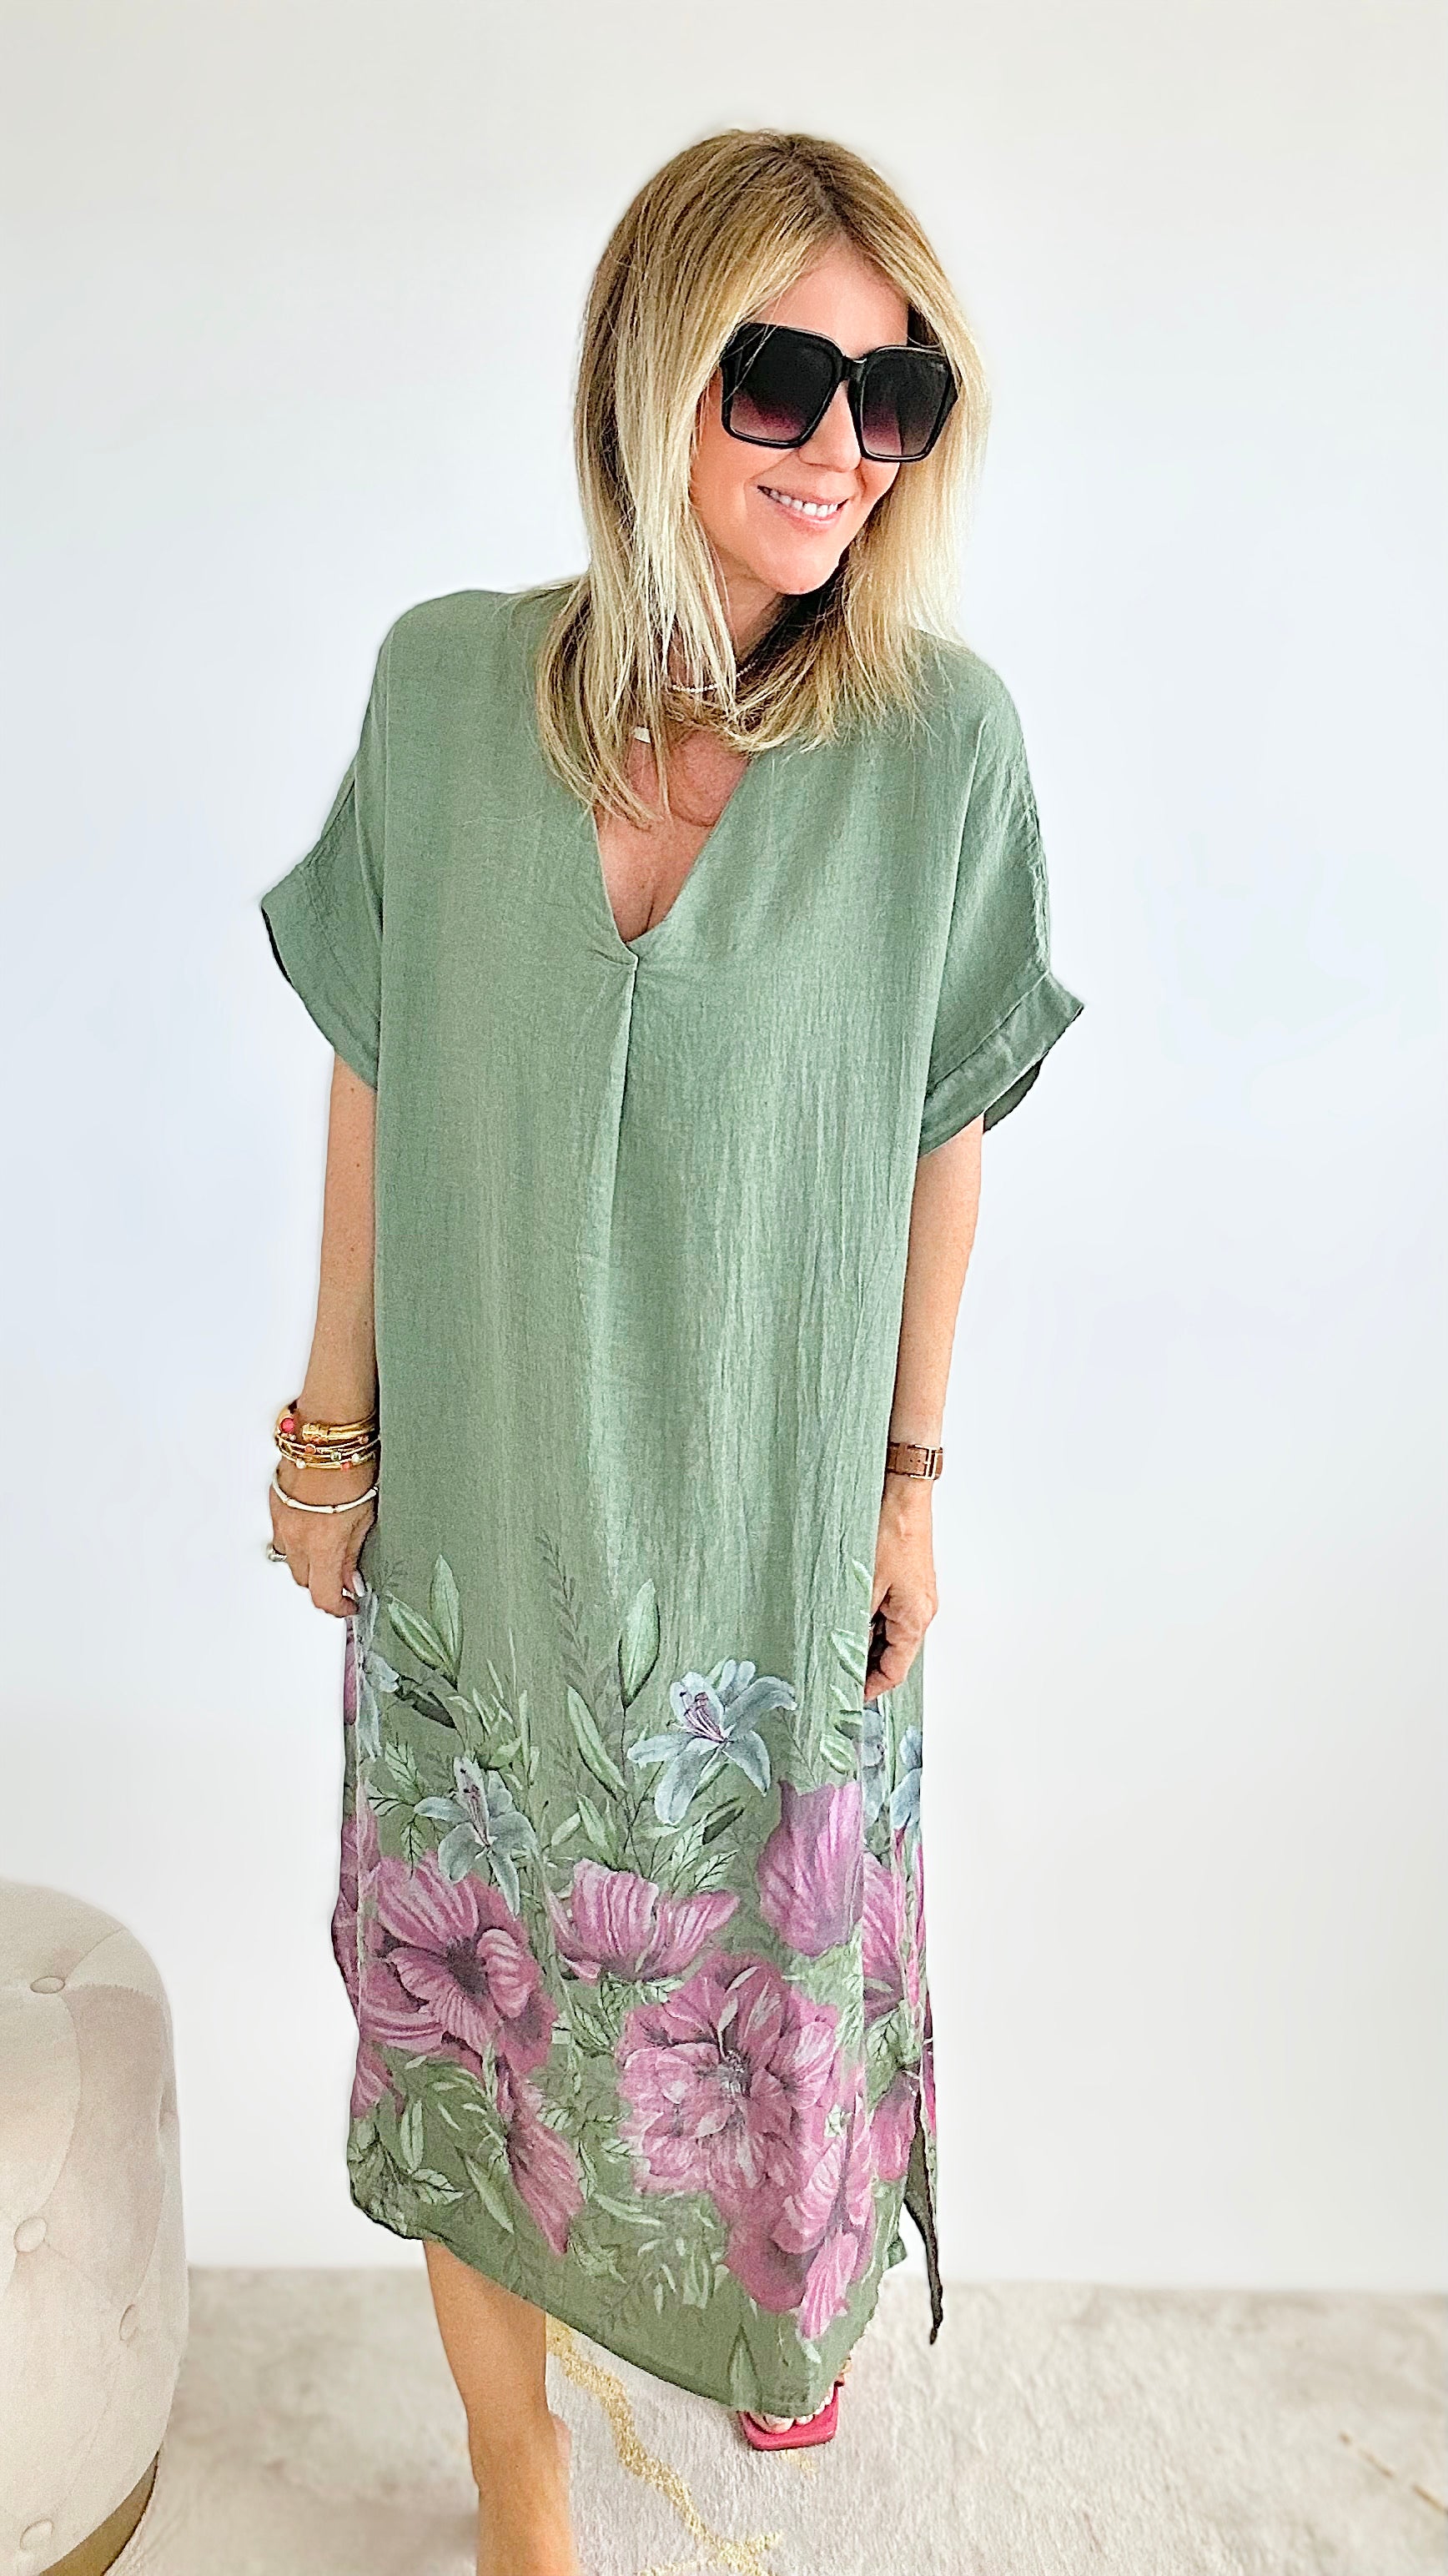 Market Floral Linen Tunic Italian Dress - Sage-200 Dresses/Jumpsuits/Rompers-Yolly-Coastal Bloom Boutique, find the trendiest versions of the popular styles and looks Located in Indialantic, FL